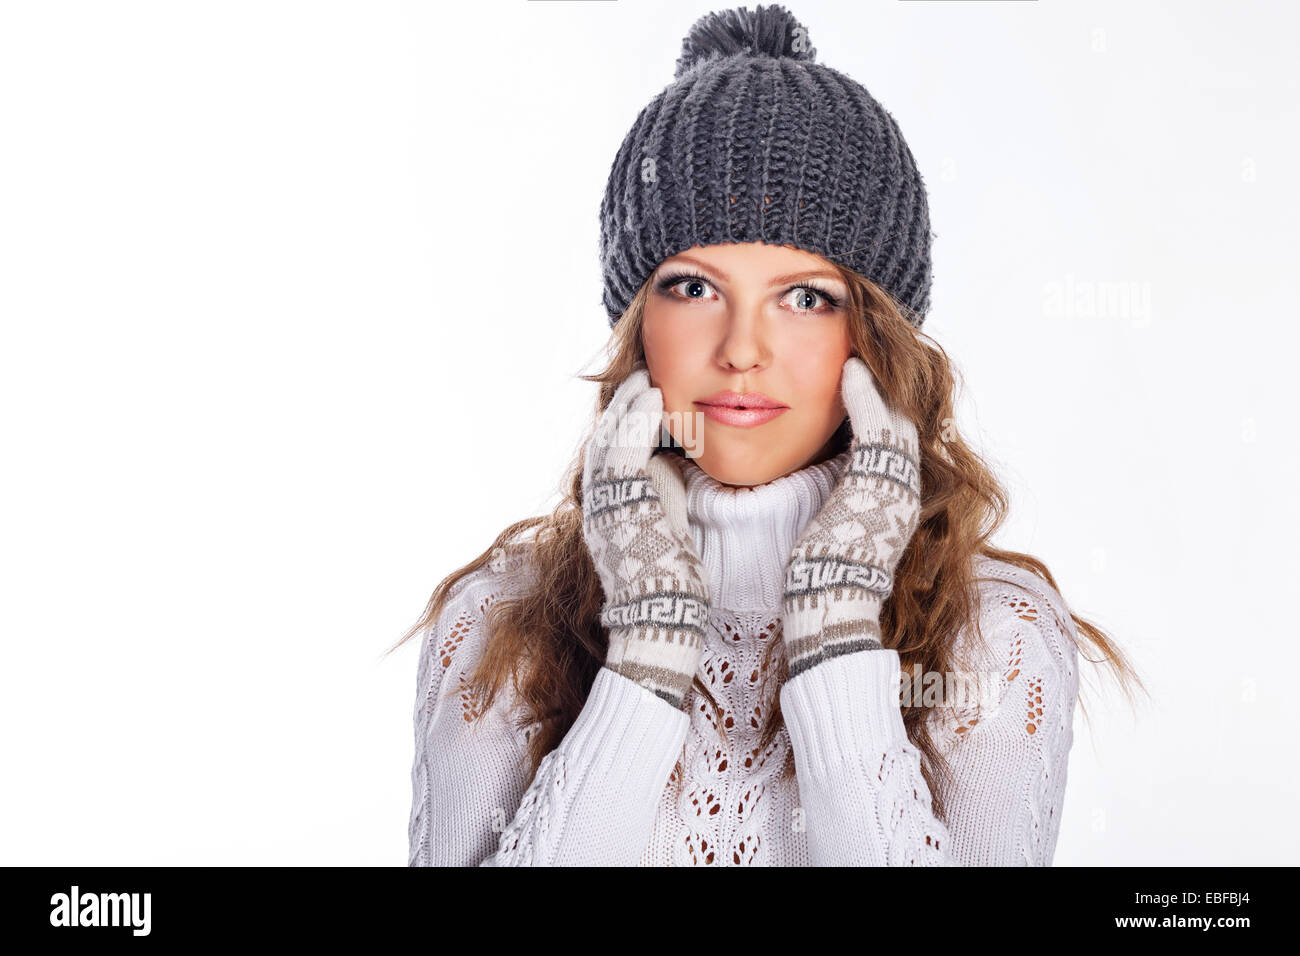 Cute teen girl in a knitted cap and sweater close-up portrait Stock ...